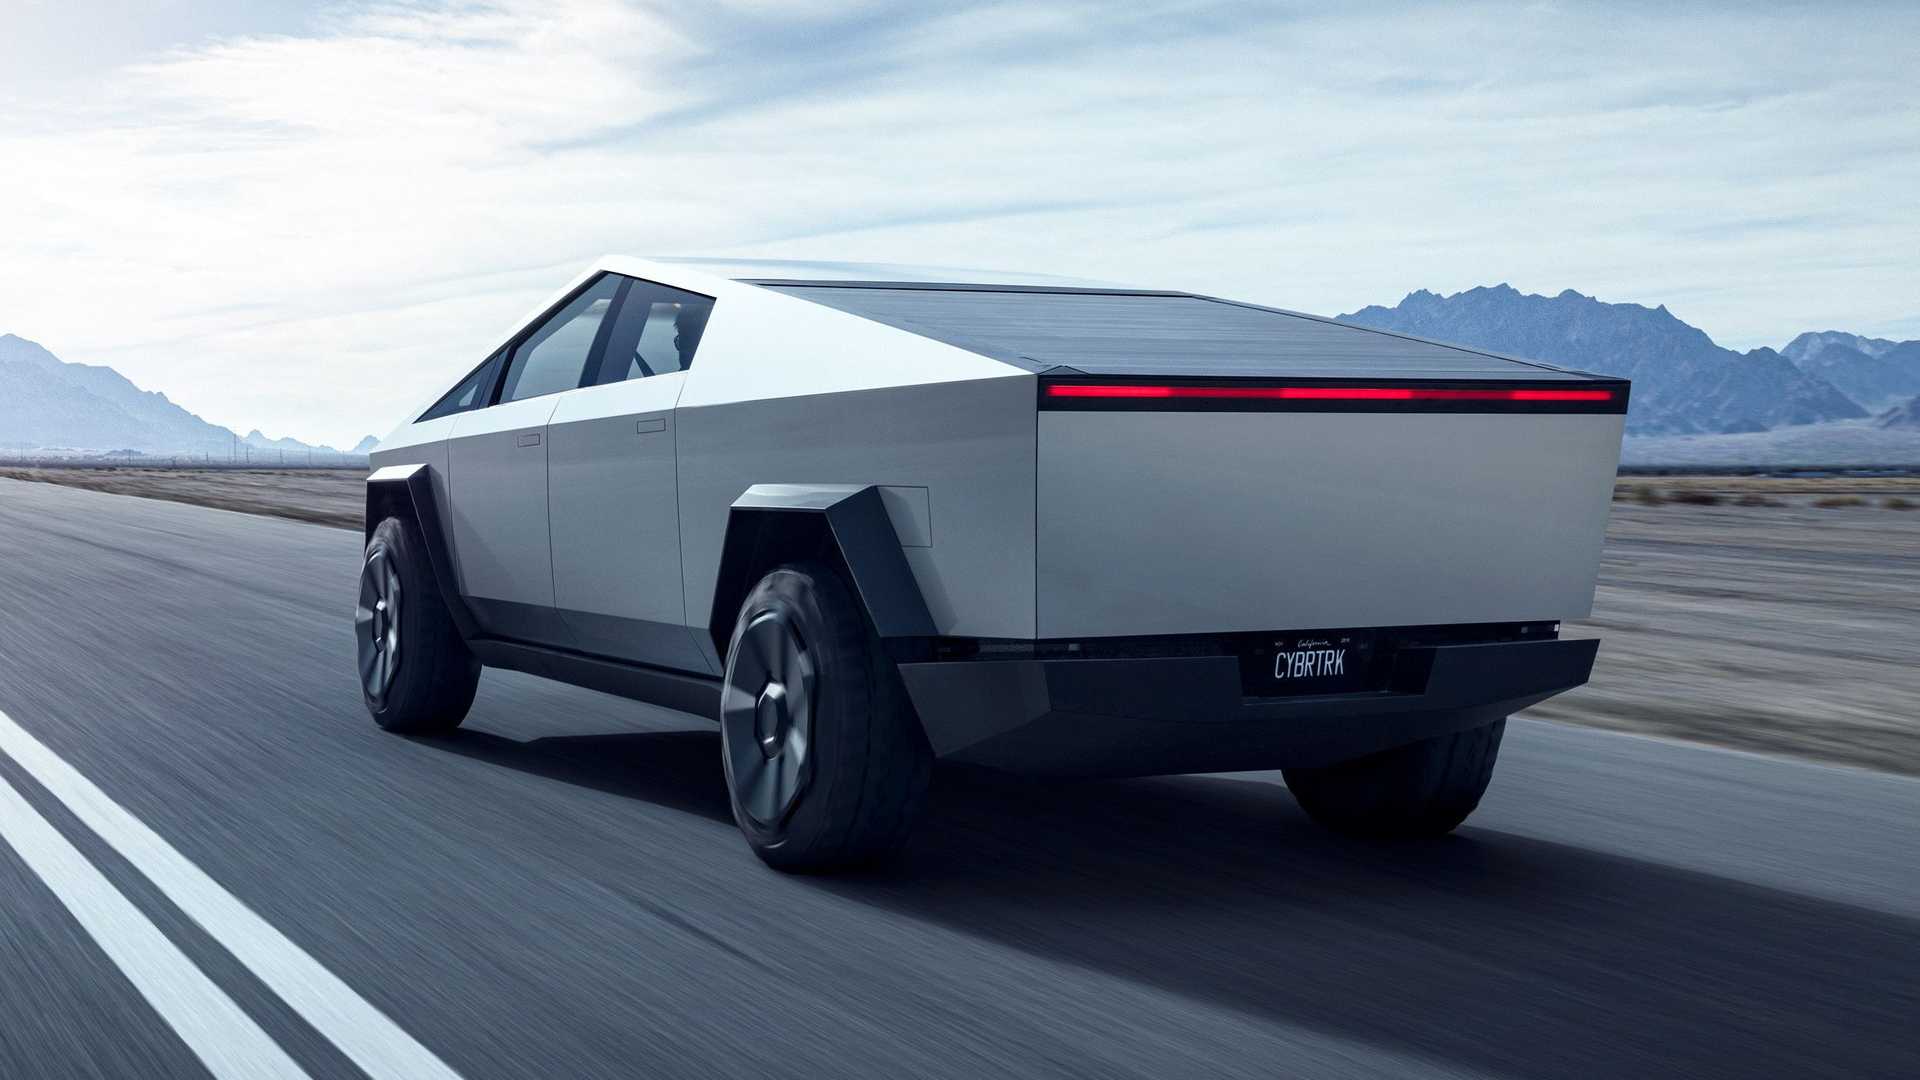 tesla cybertruck to debut with 350-mile range, skip 500-mile trim for later: rumor